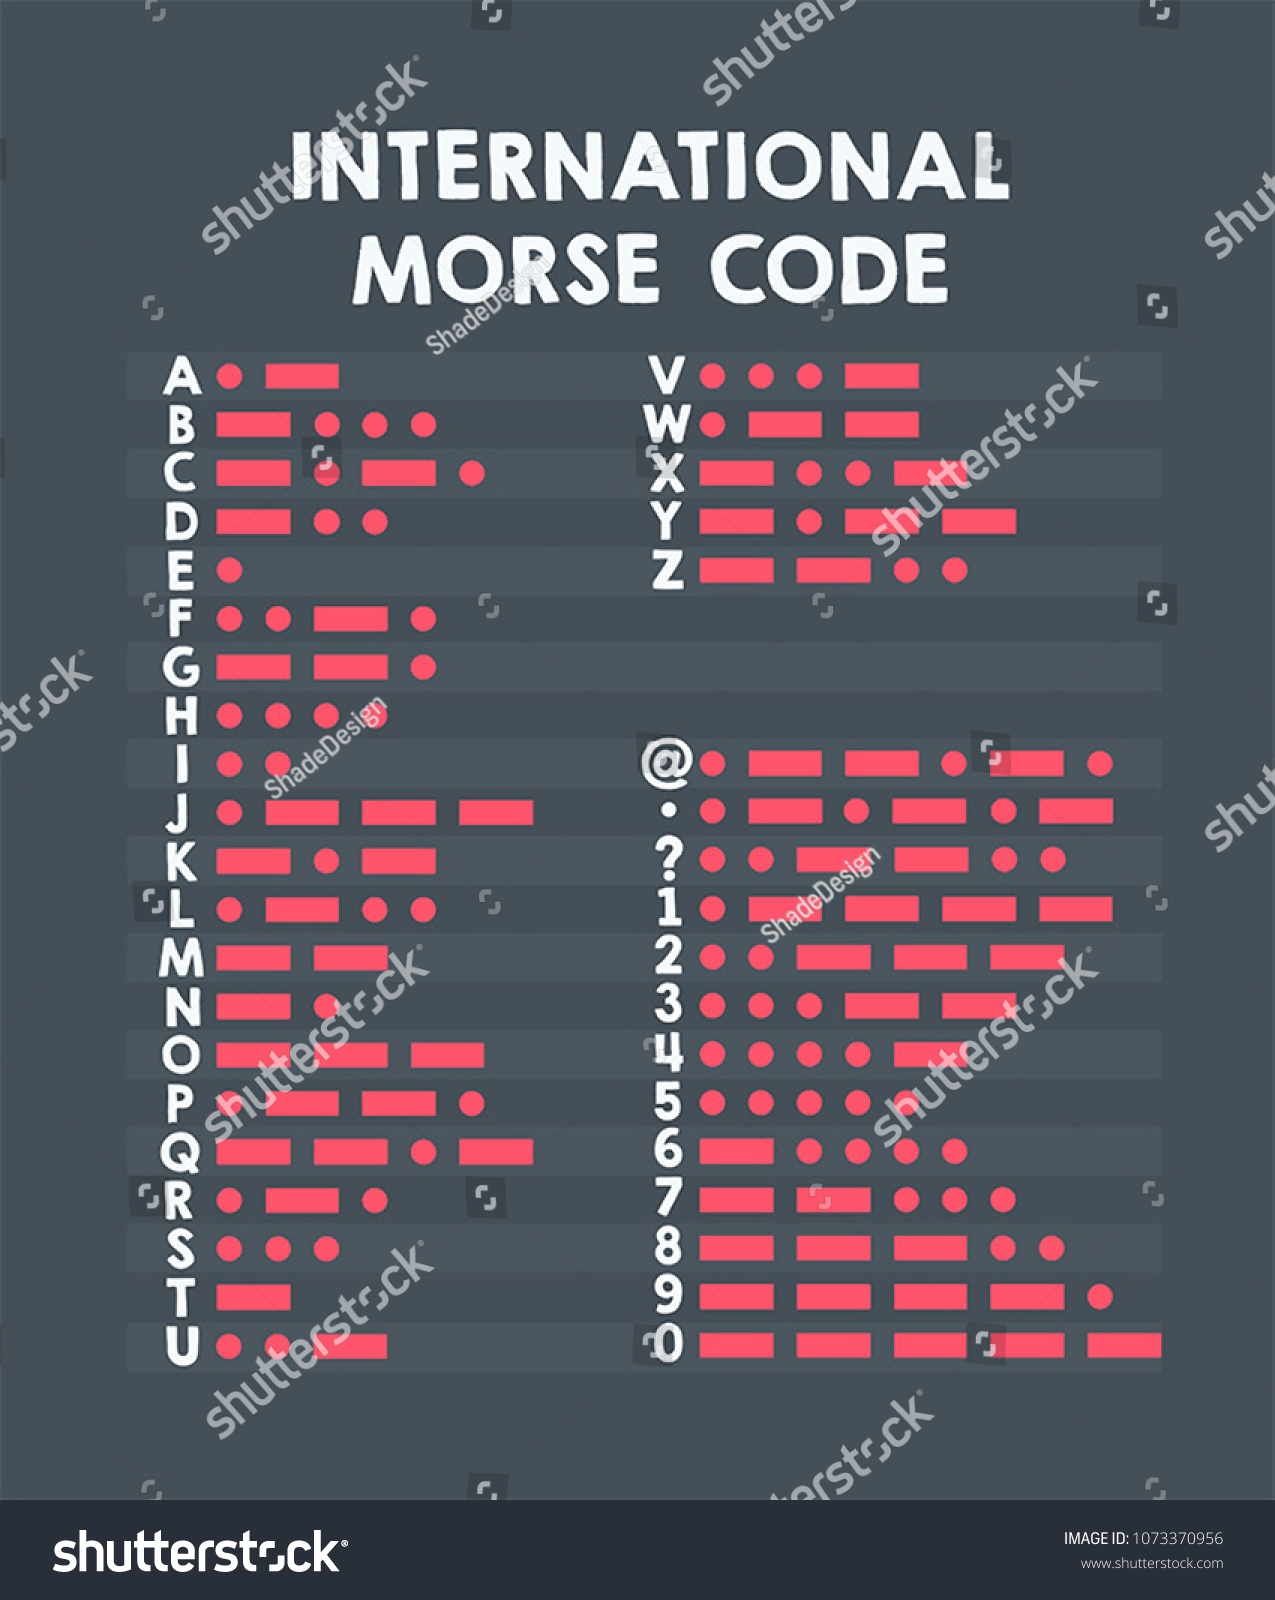 SVG of Icon International Morse code. The table consists of an alphabet, numbers and letters with their value in the form of dots and dashes. svg